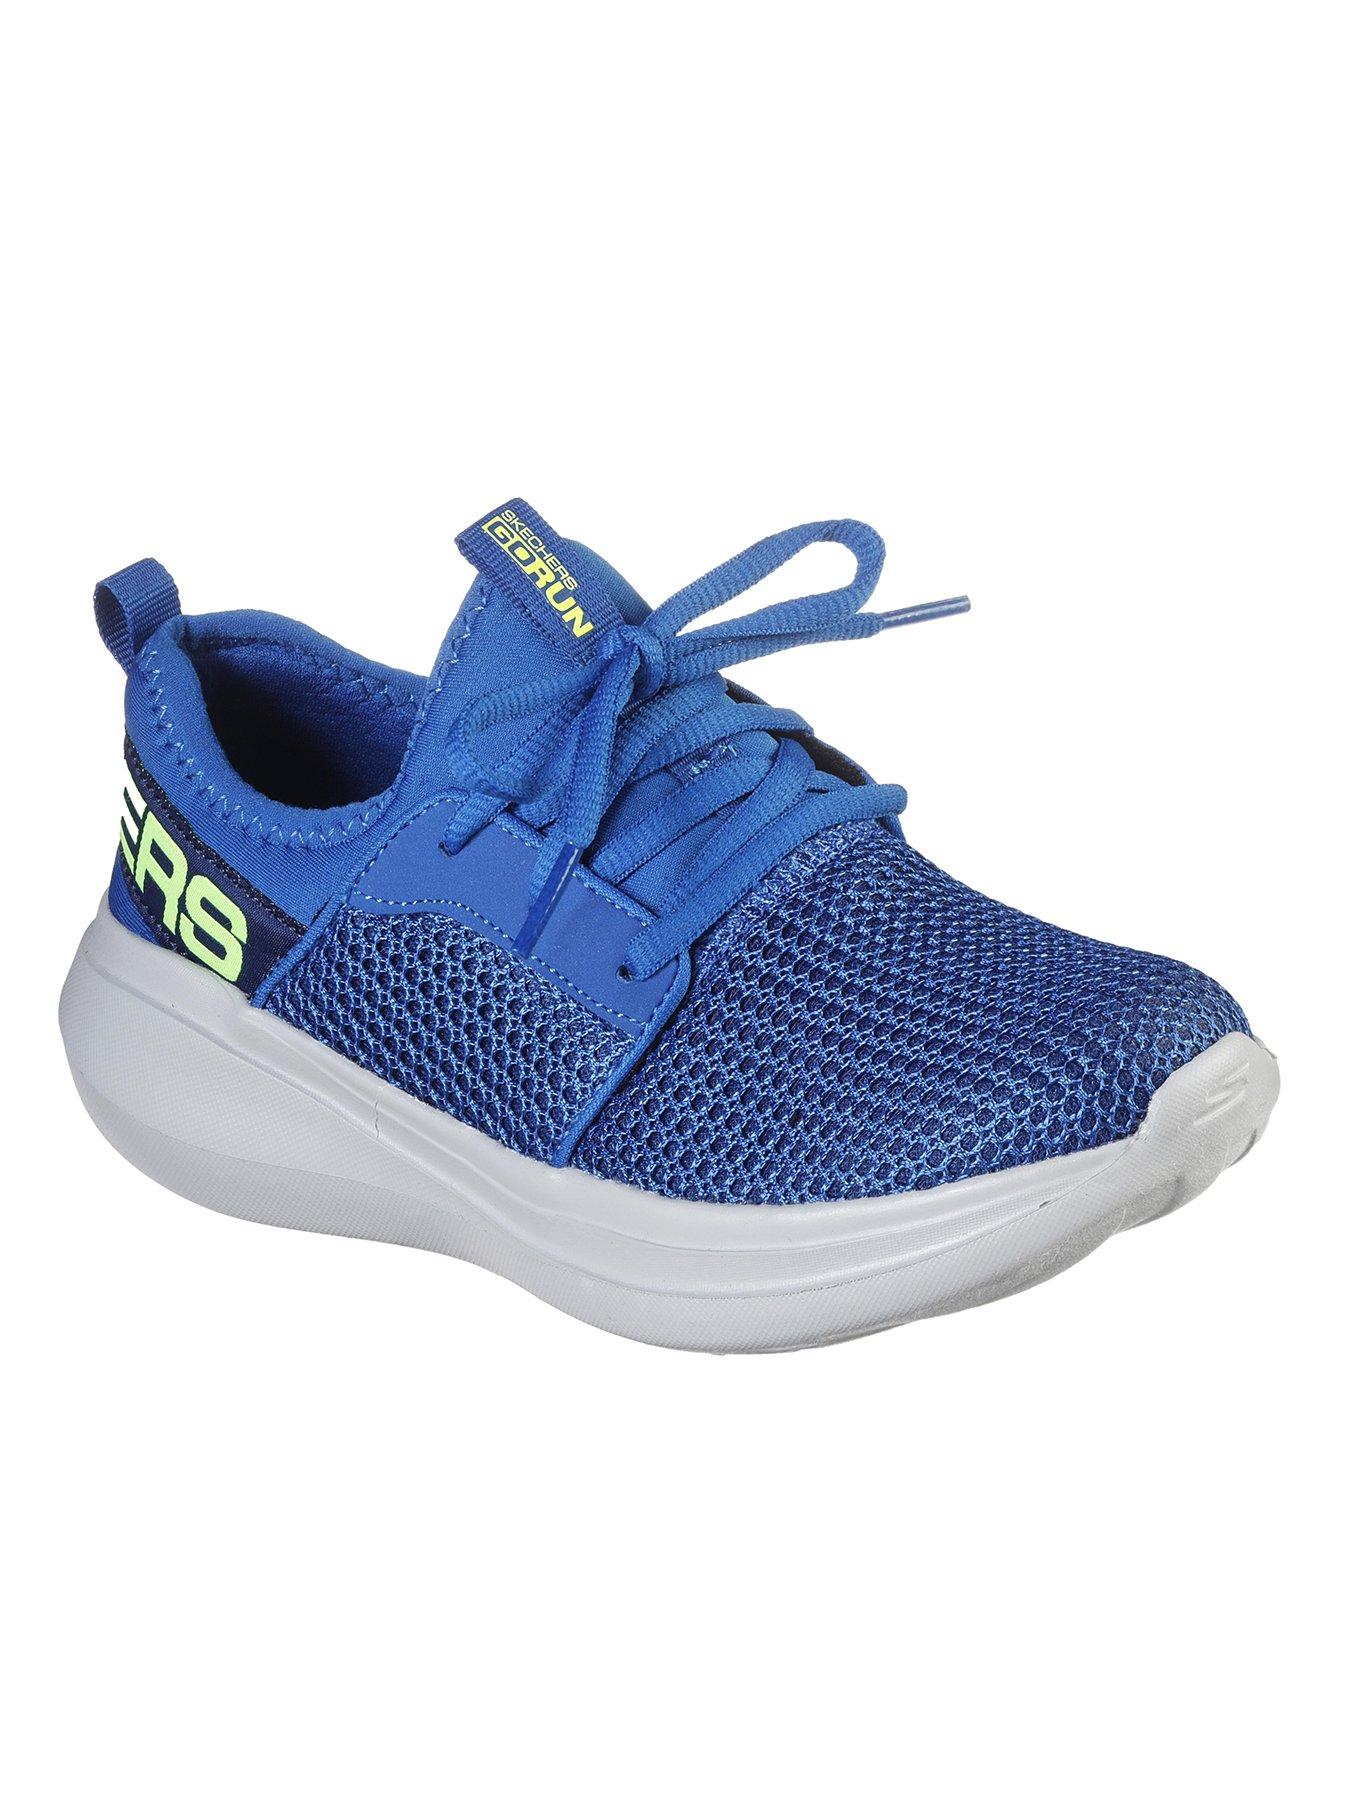 skechers mens shoes clearance uk